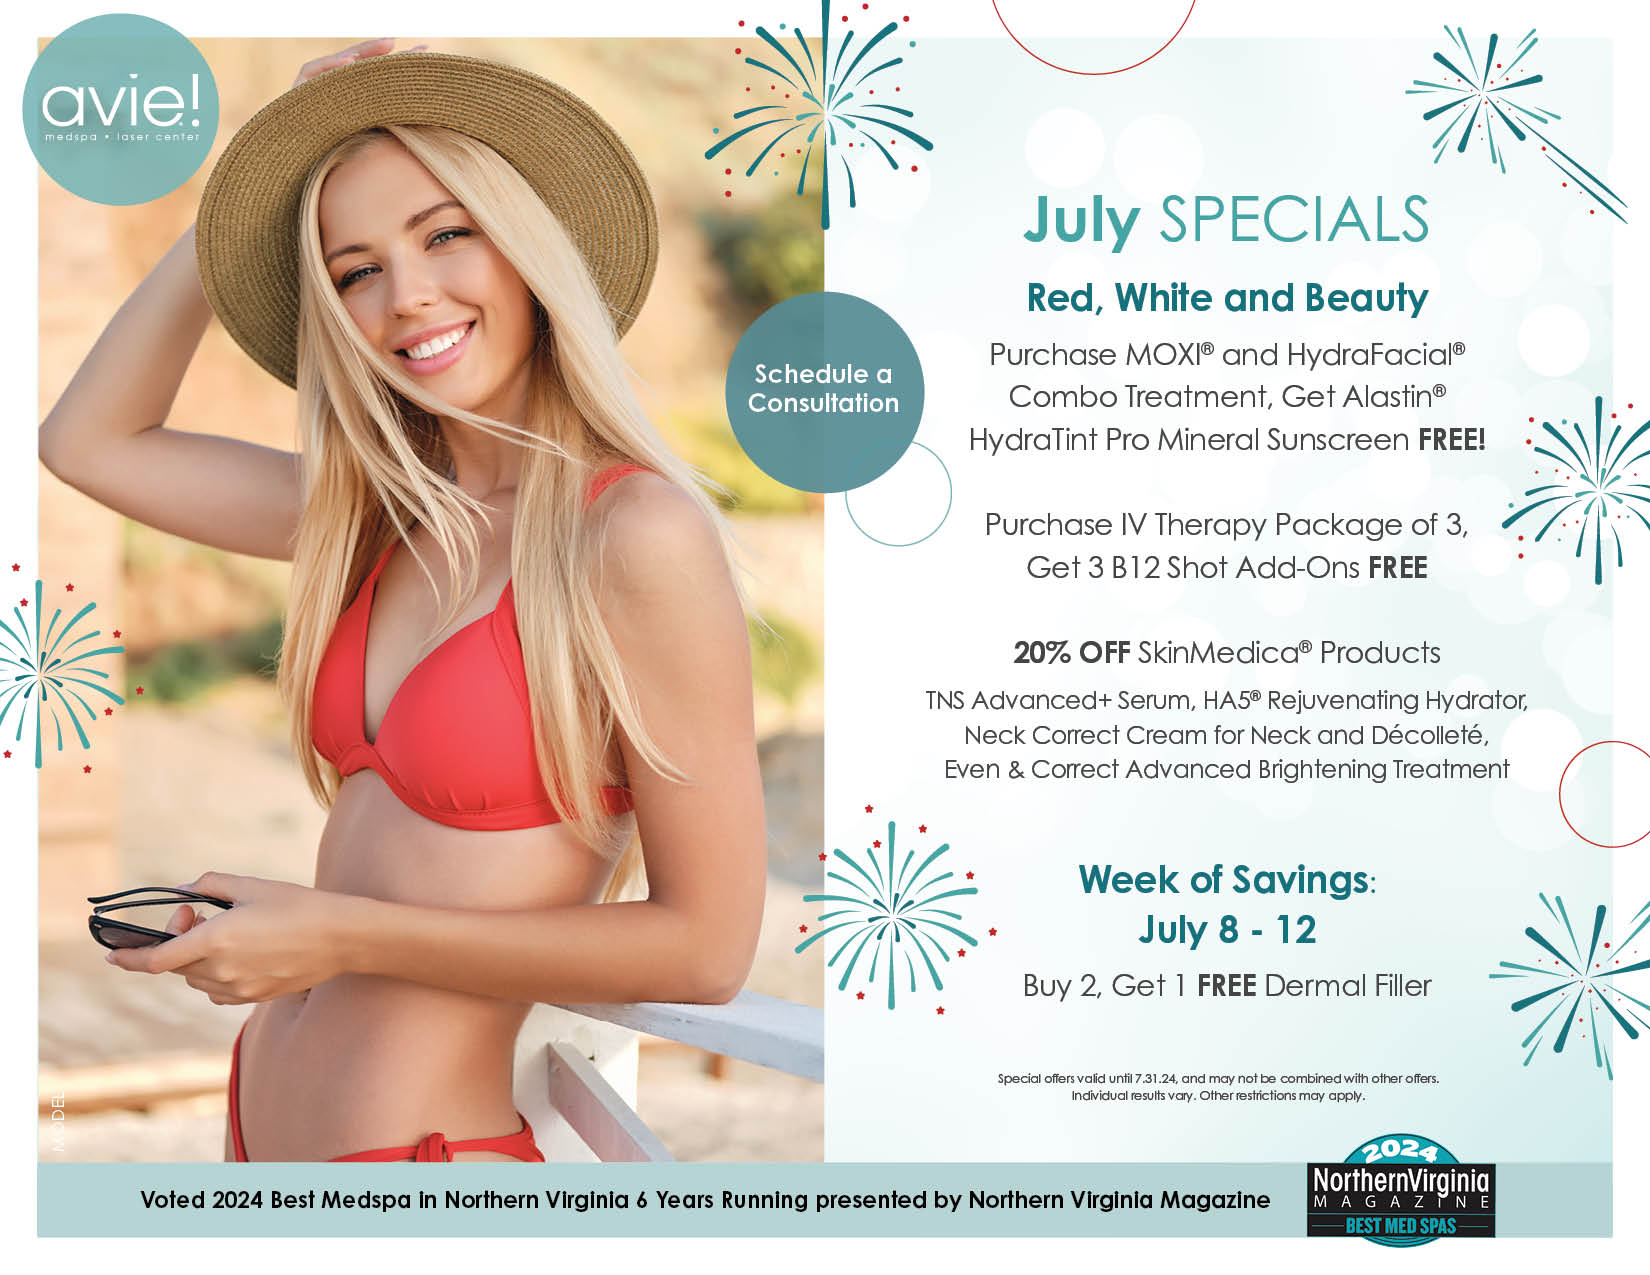 July SPECIALS Red, White and Beauty Purchase MOXI® and HydraFacial® Combo Treatment, Get Alastin® HydraTint Pro Mineral Sunscreen FREE! Purchase IV Therapy Package of 3, Get 3 B12 Shot Add-Ons FREE 20% OFF SkinMedica® Products TNS Advanced+ Serum, HA5® Rejuvenating Hydrator, Neck Correct Cream for Neck and Décolleté, Even & Correct Advanced Brightening Treatment Week of Savings: July 8 - 12 Buy 2, Get 1 FREE Dermal Filler